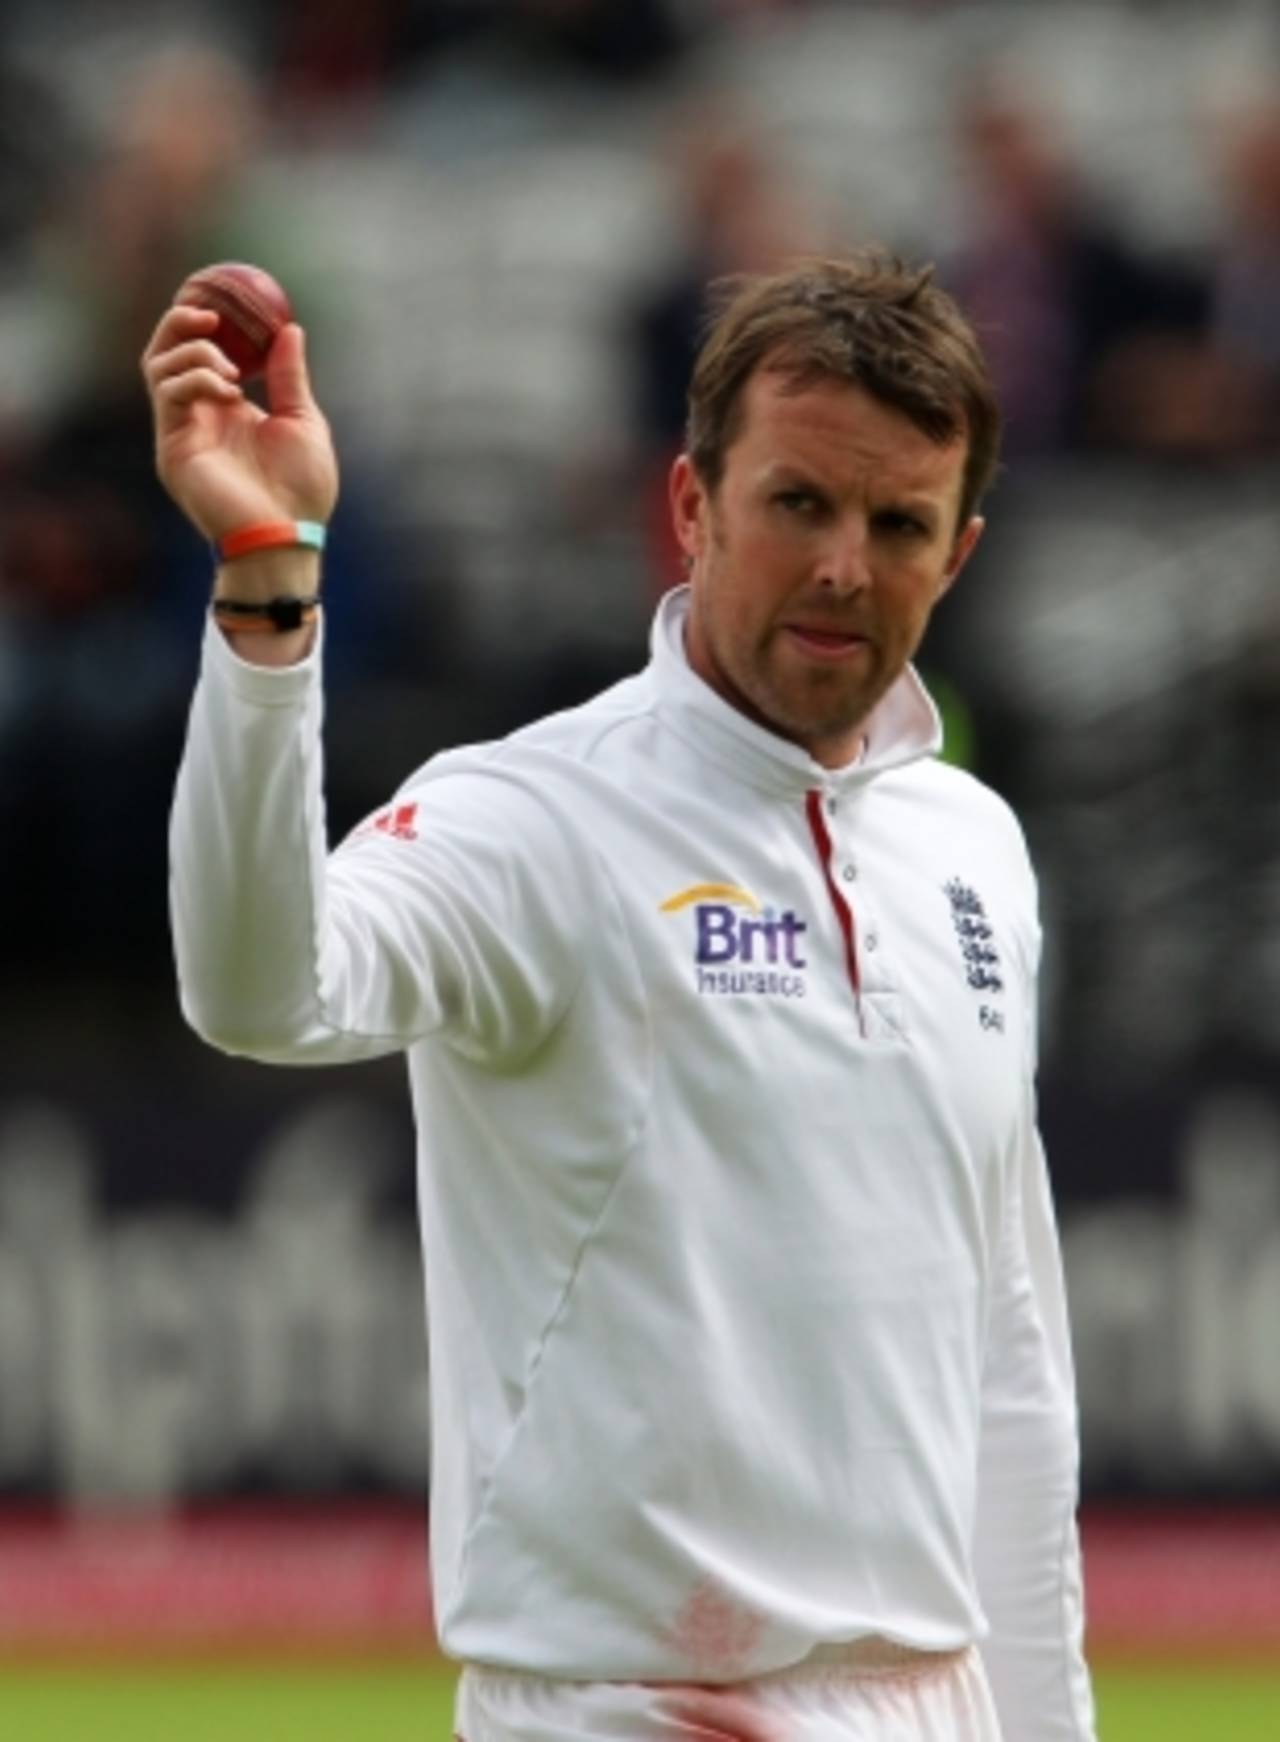 Graeme Swann picked up his ninth five-wicket haul in Tests but his celebrations were muted, England v Pakistan, 4th Test, Lord's, August 29, 2010